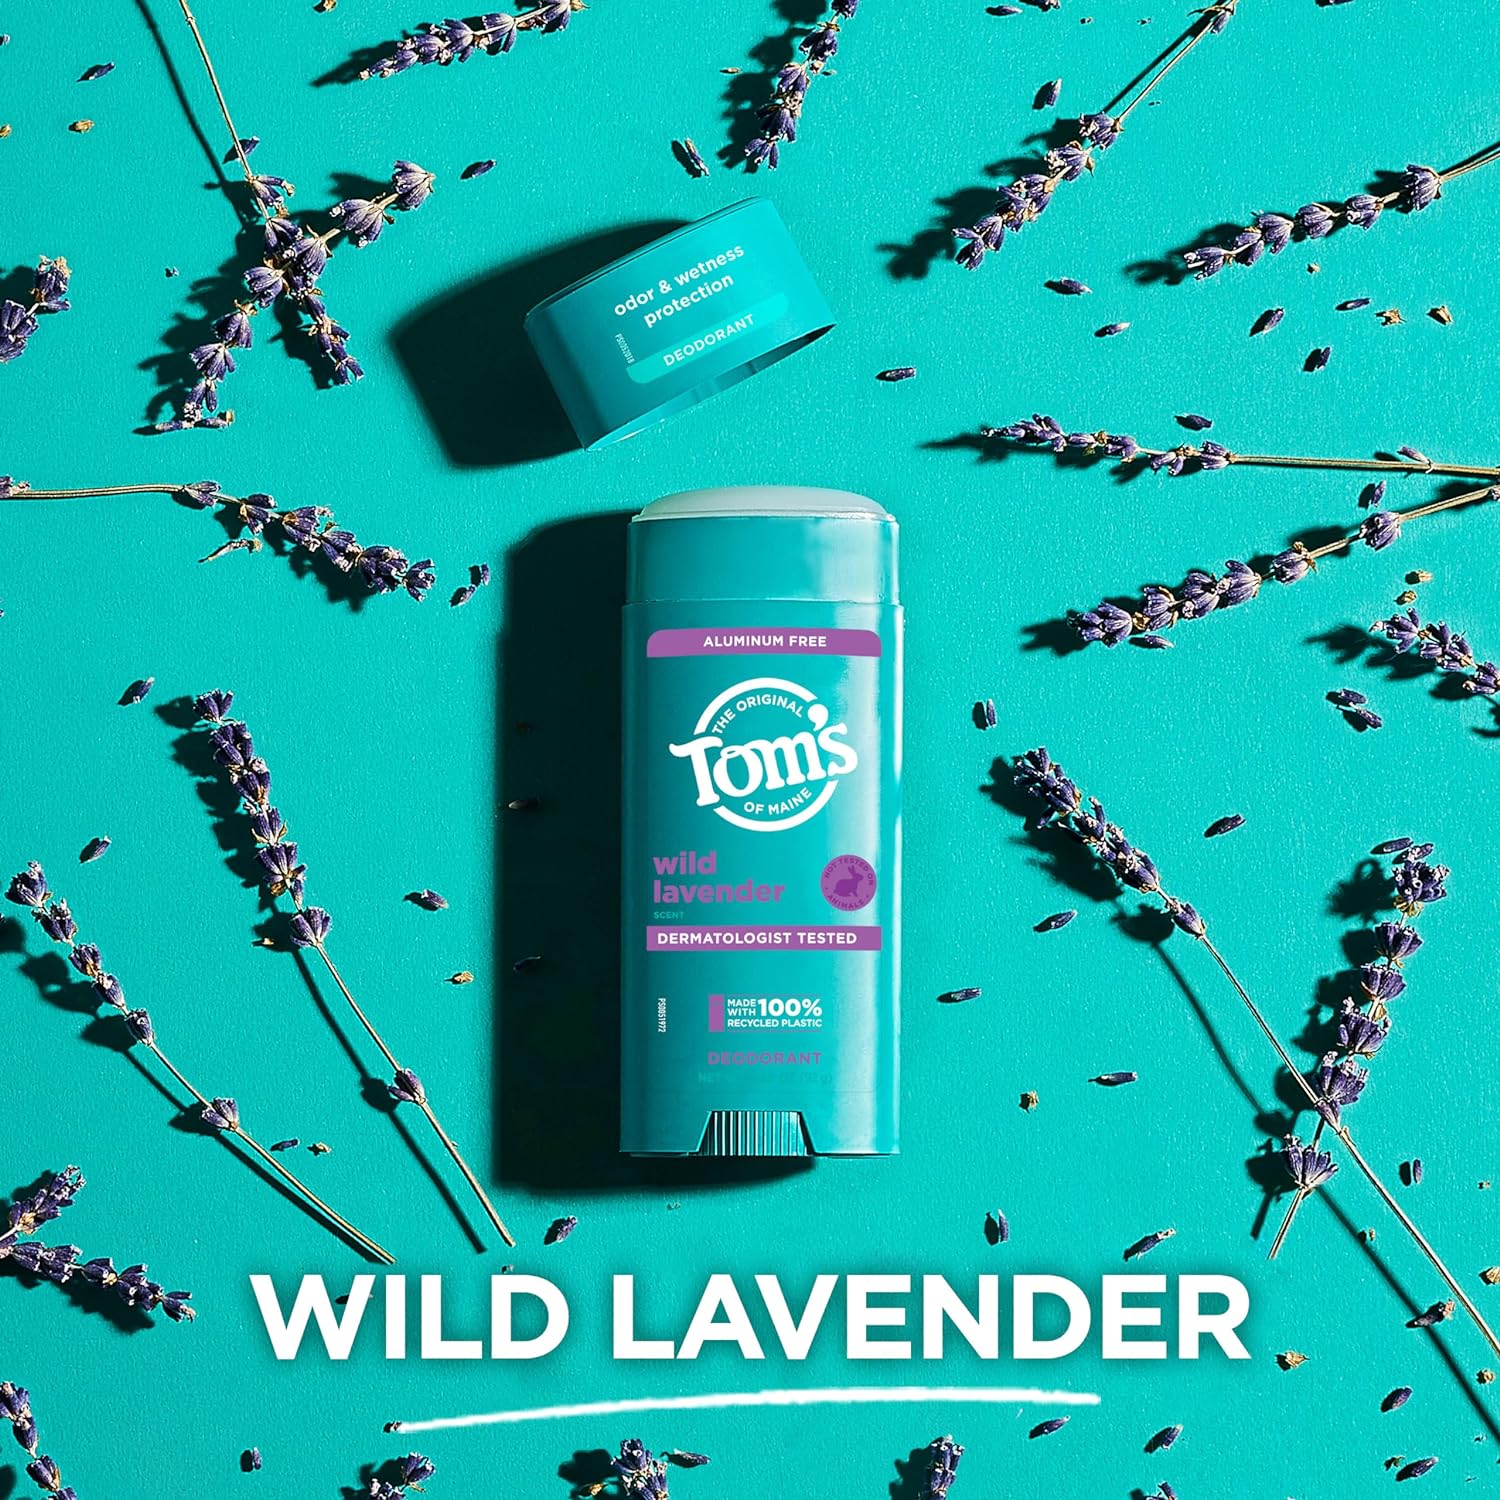 Tom’s of Maine Wild Lavender Natural Deodorant for Women and Men, Aluminum Free, 3.25 oz, 2-Pack : Beauty & Personal Care